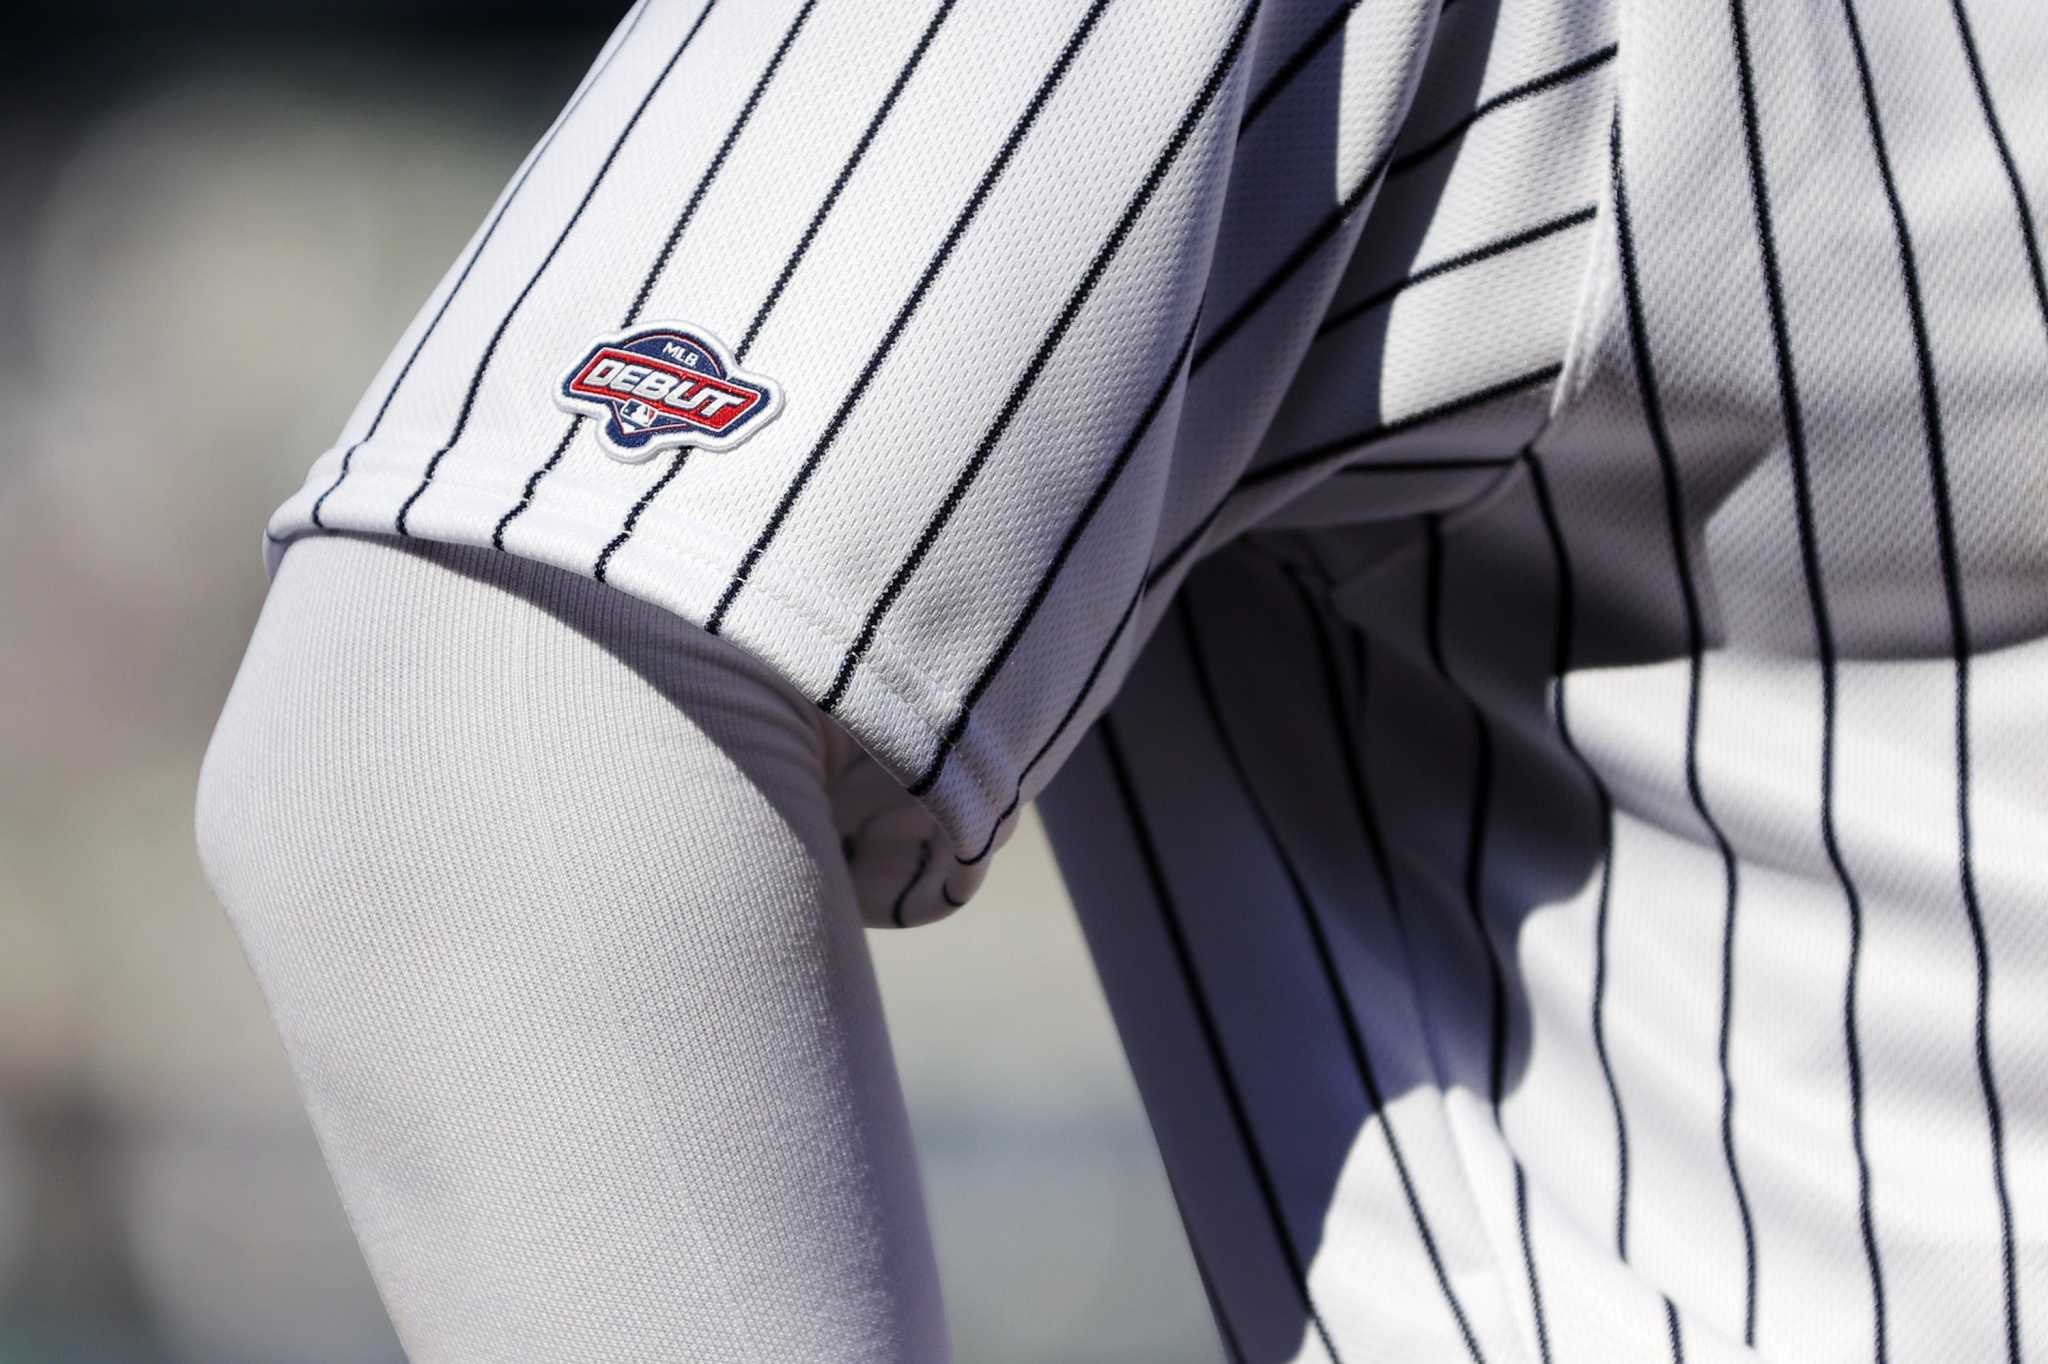 Jersey patch ads could be coming for Yankees, Mets in the near future